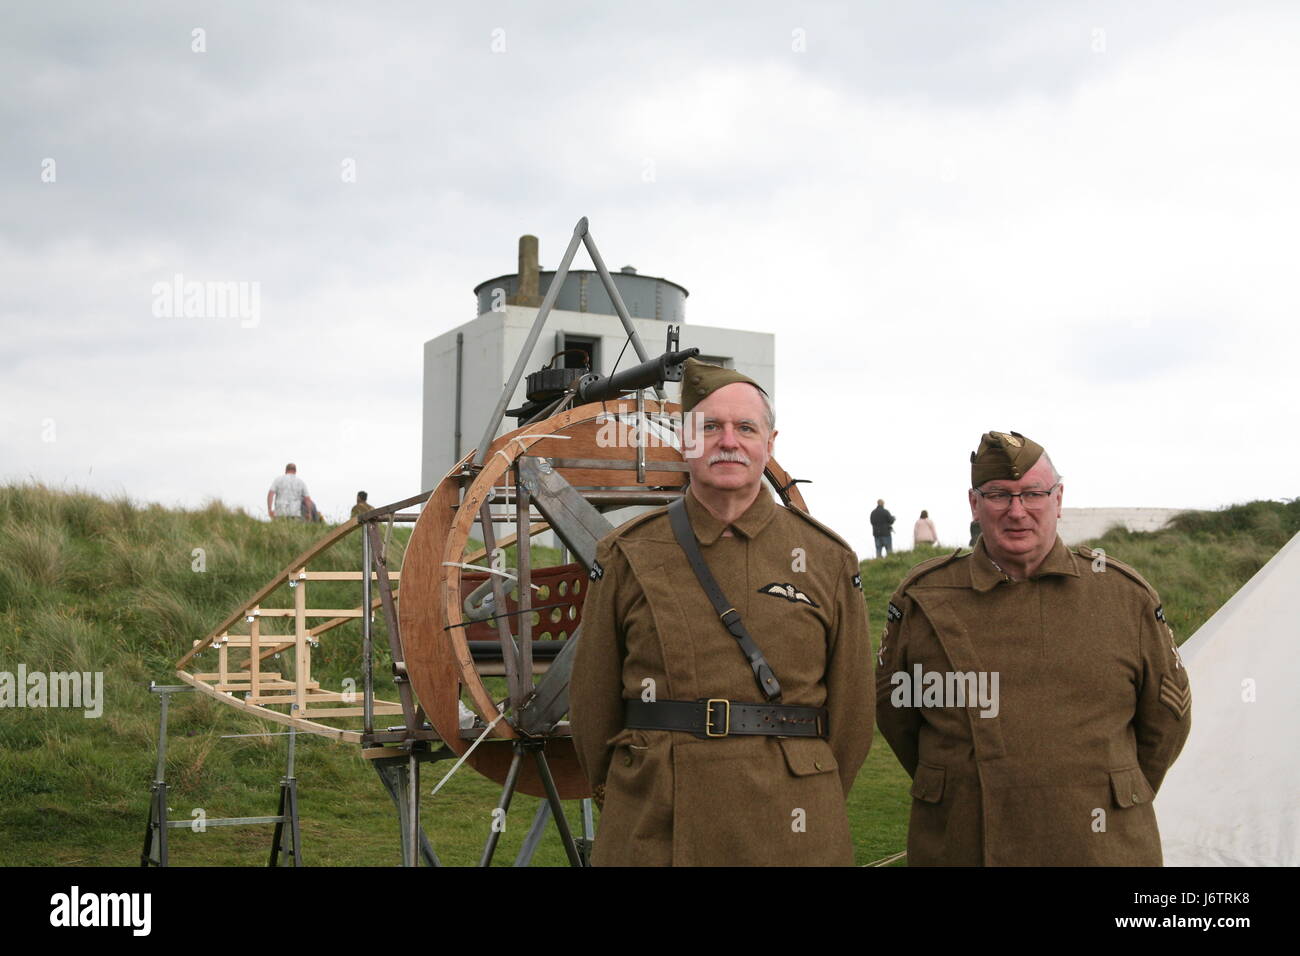 Blyth Battery High Resolution Stock Photography and Images - Alamy